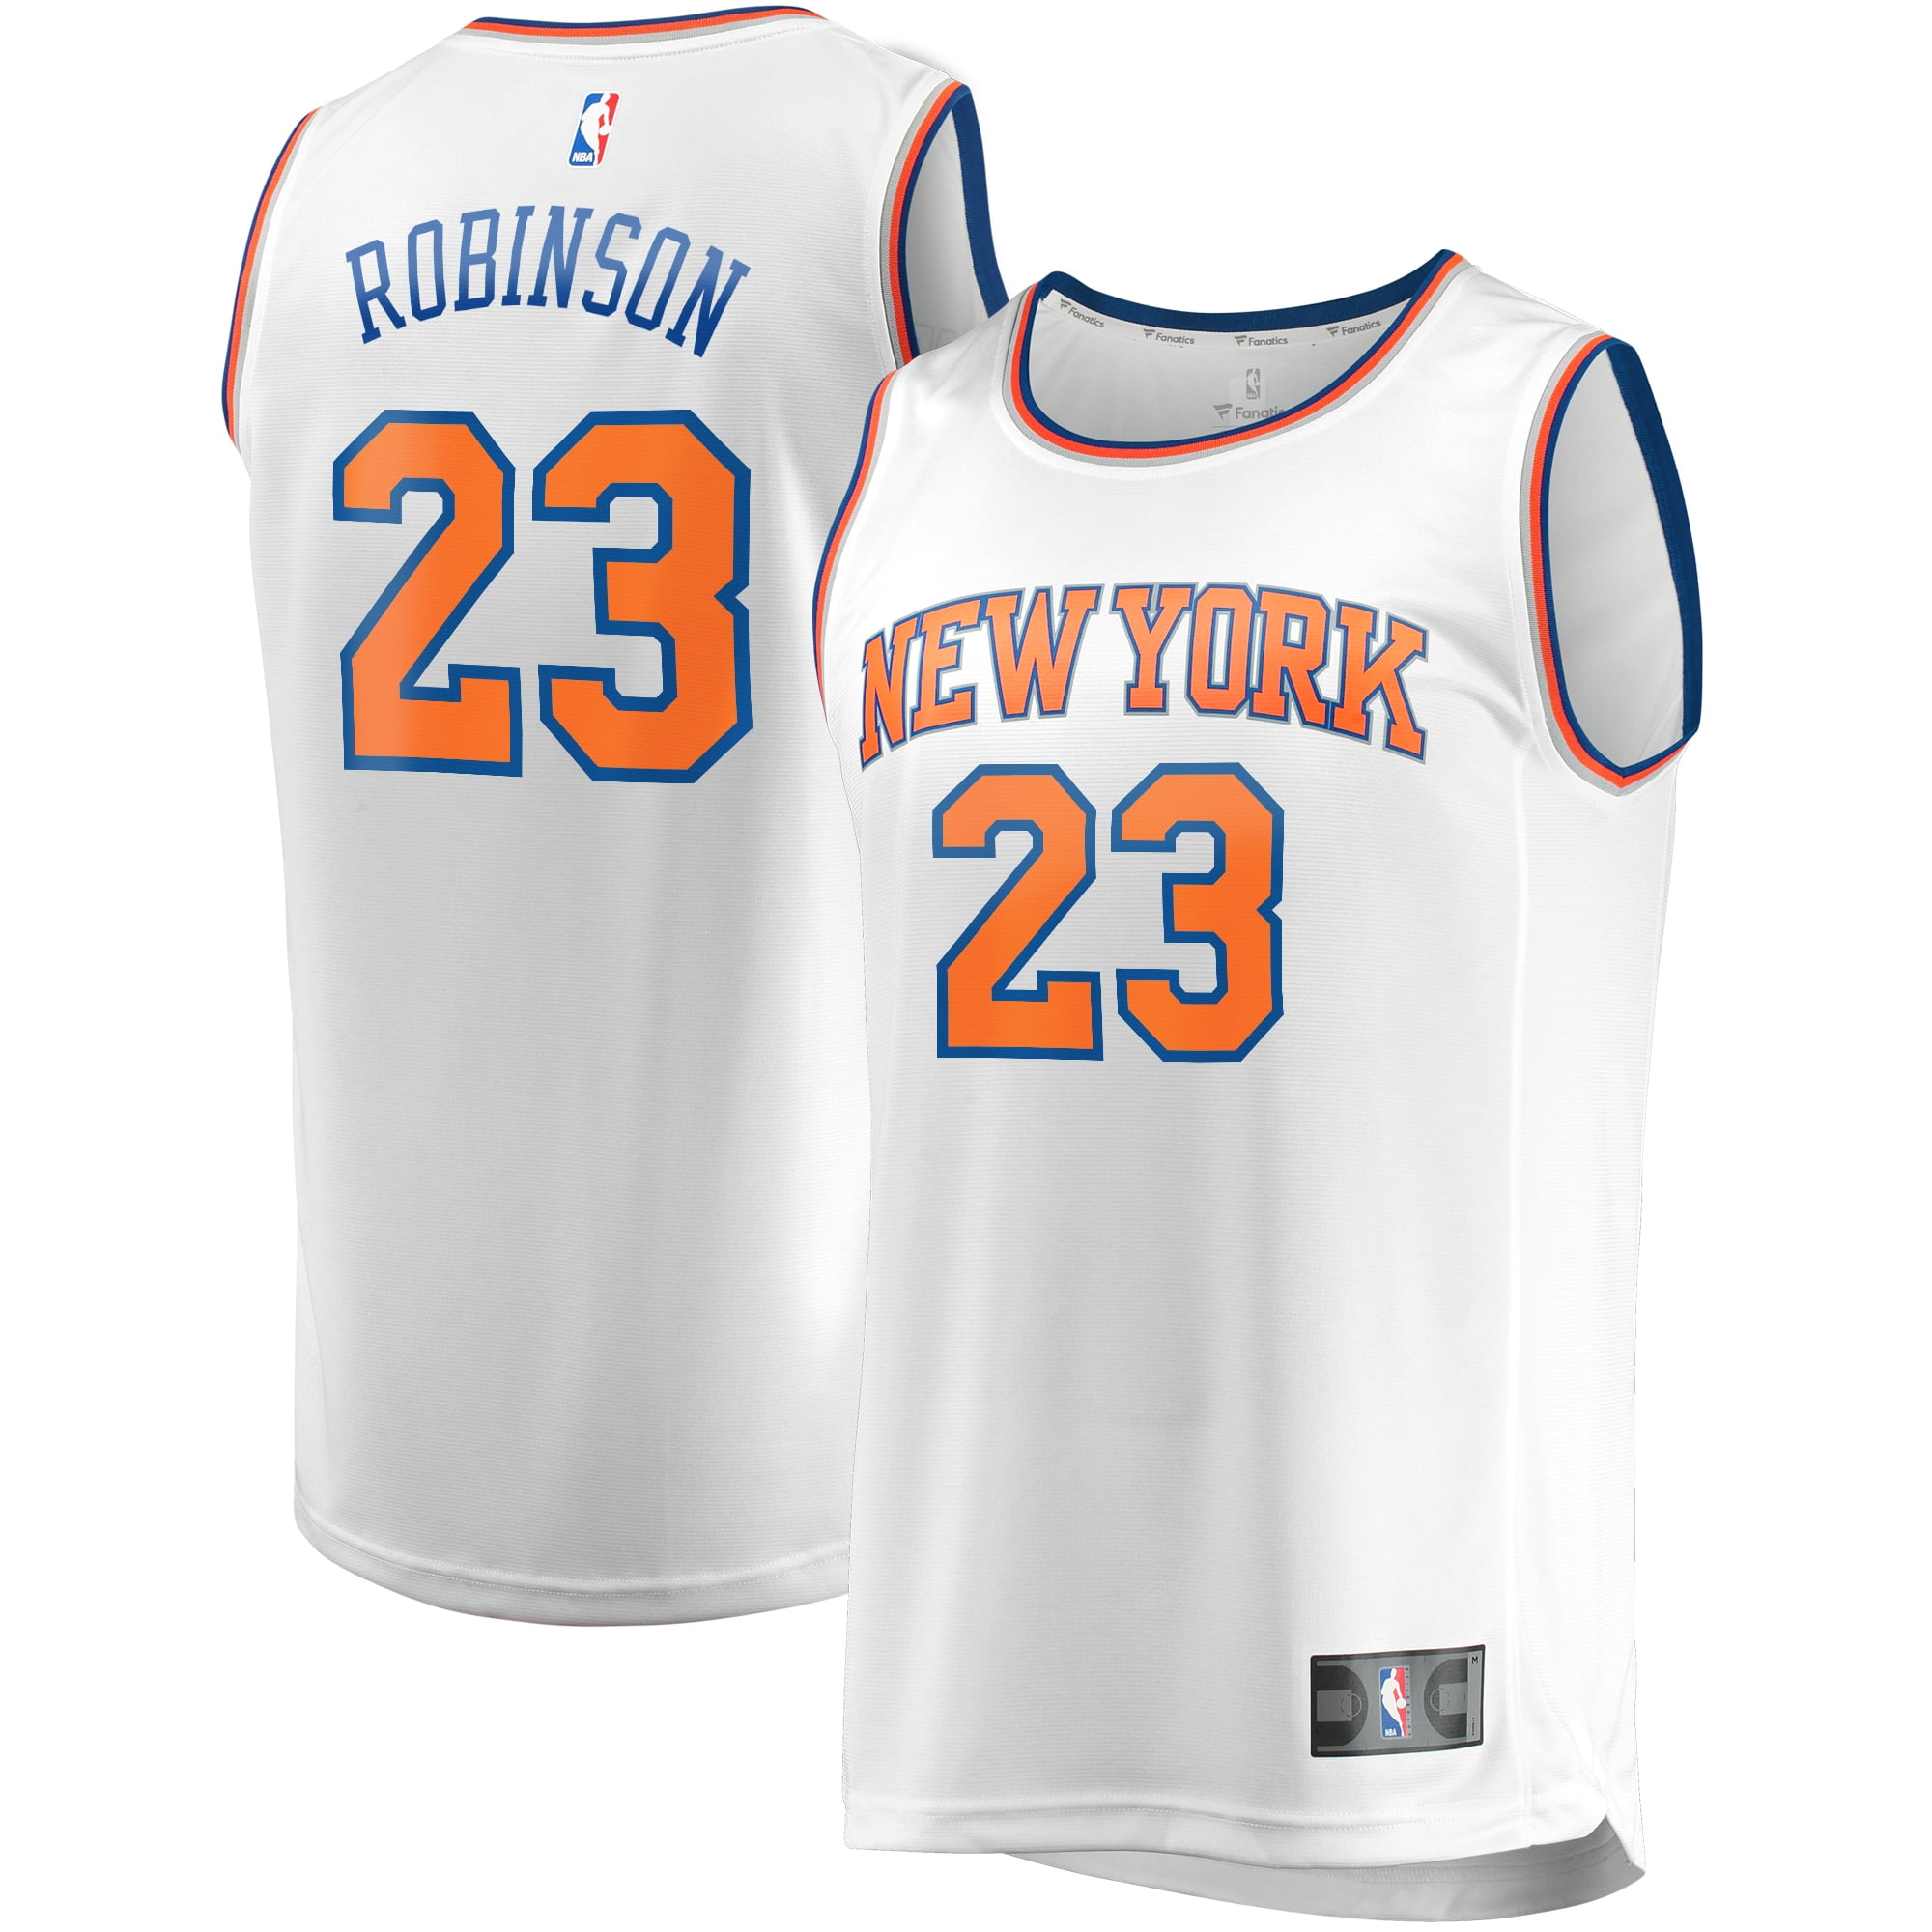 mitchell robinson jersey number